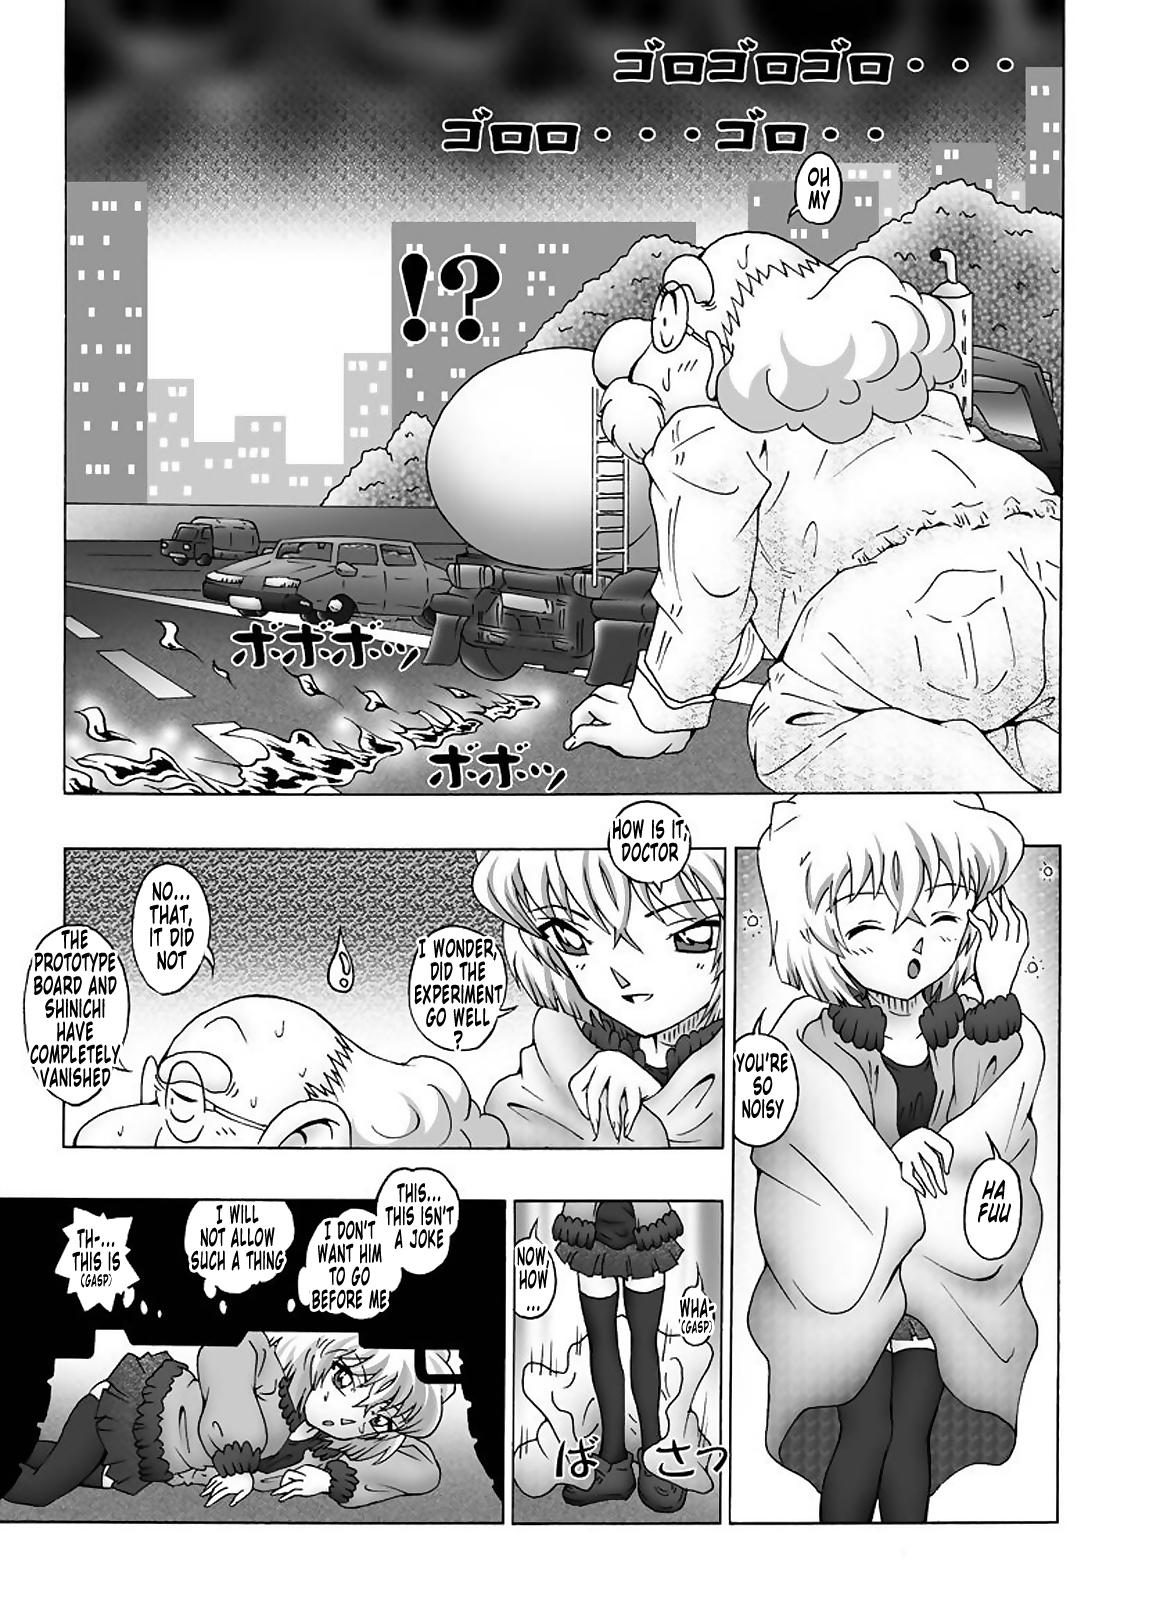 Solo Bumbling Detective Conan - File 12: The Case of Back To The Future - Detective conan Flogging - Page 6